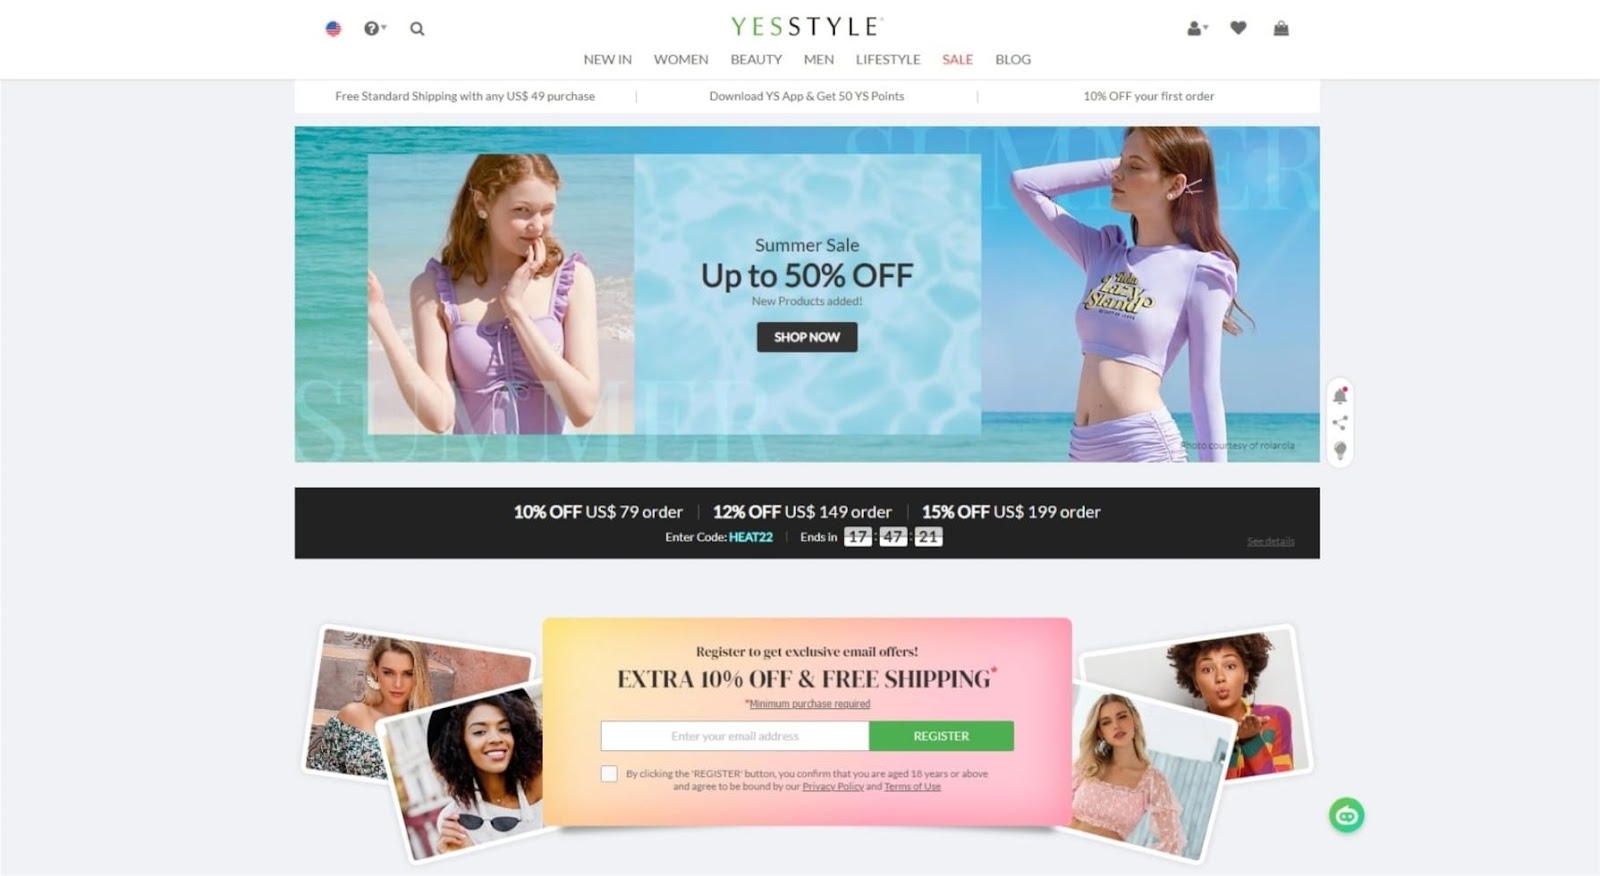 yestyle flash sale countdown timer